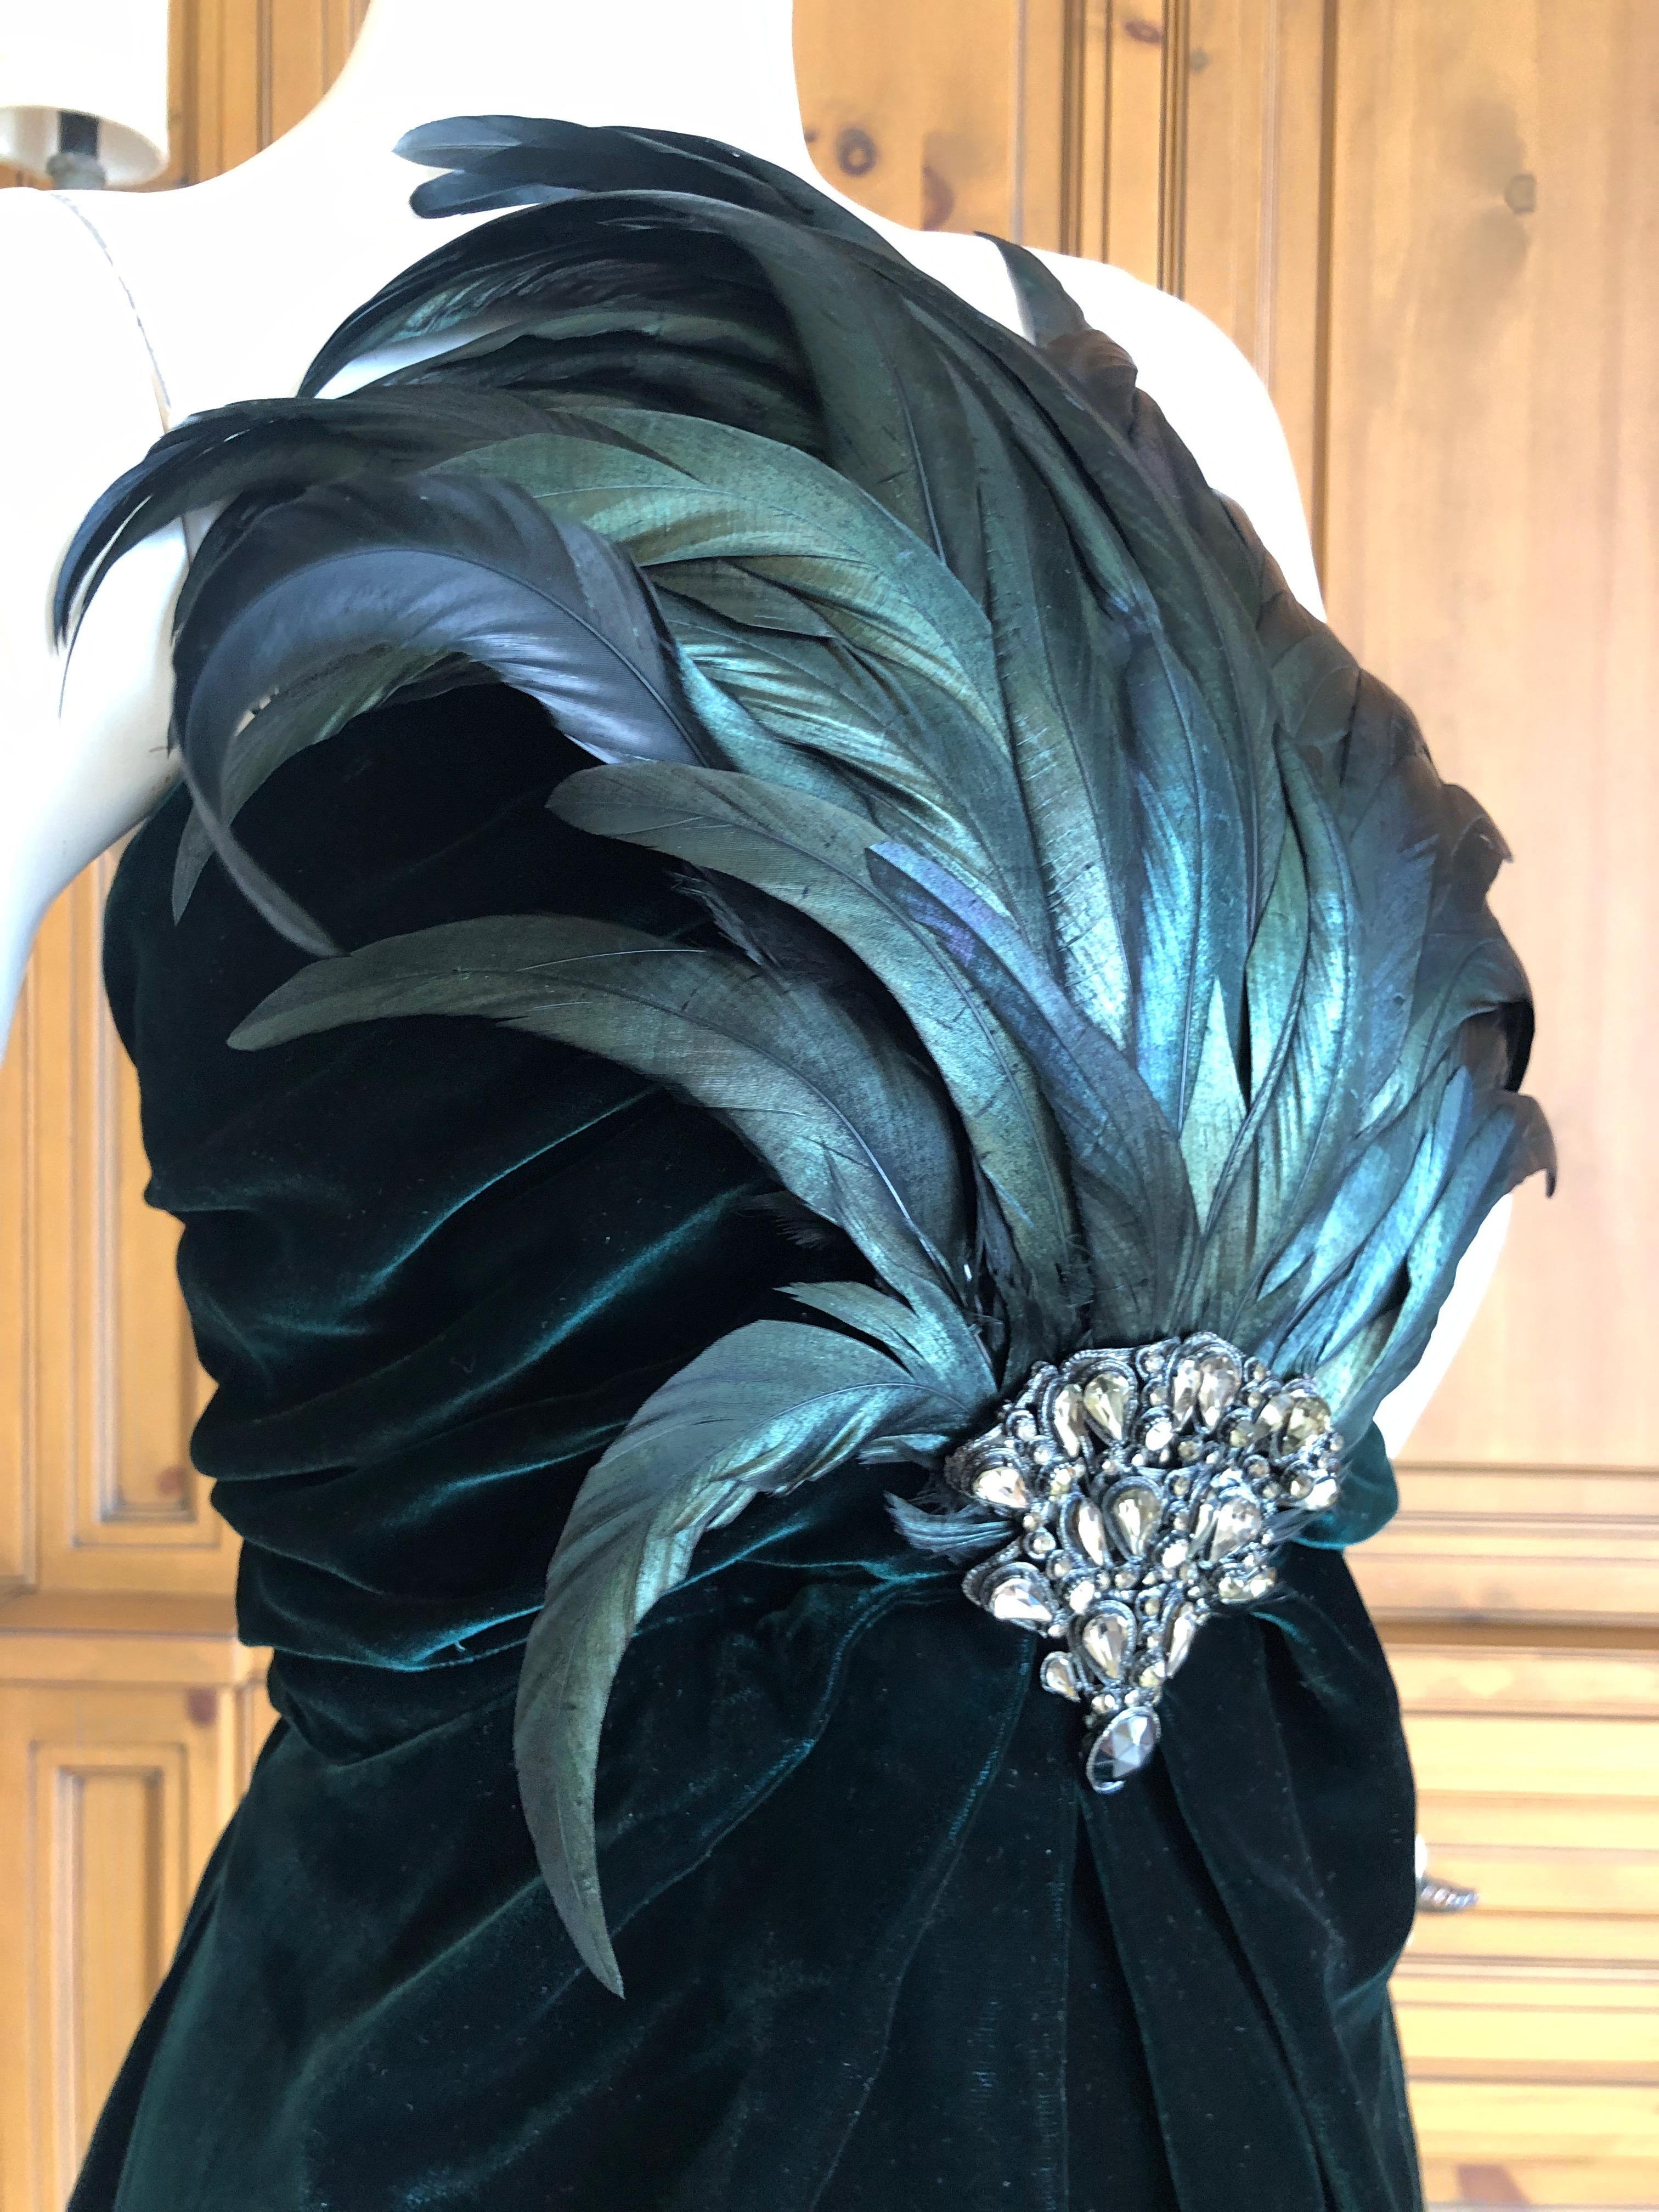 Bill Blass Fall 1986 Green Velvet Jeweled & Feathered Strapless Cocktail Dress  In Good Condition For Sale In Cloverdale, CA